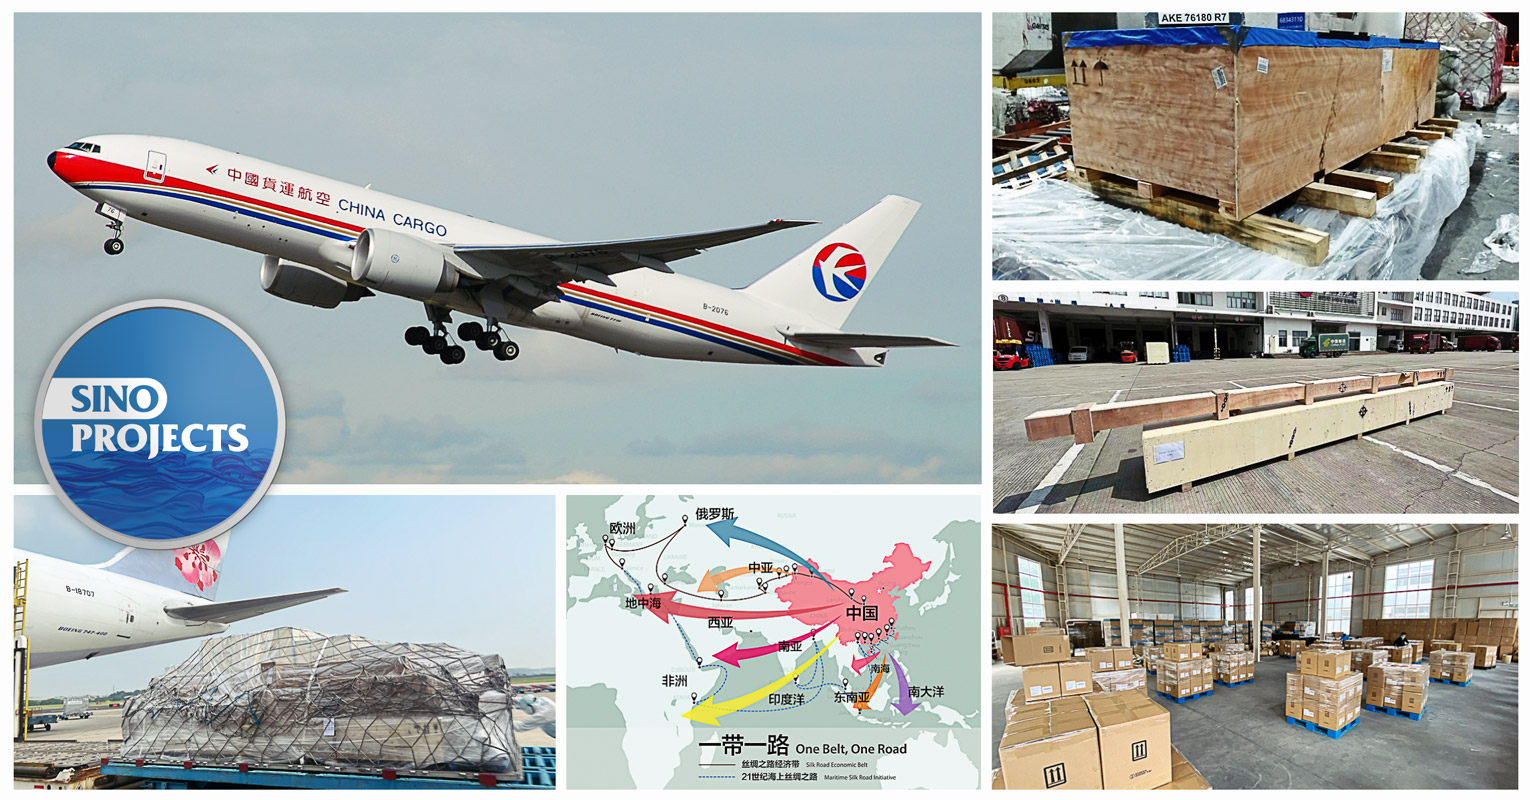 Sino Projects Launches Air Freight Service in China